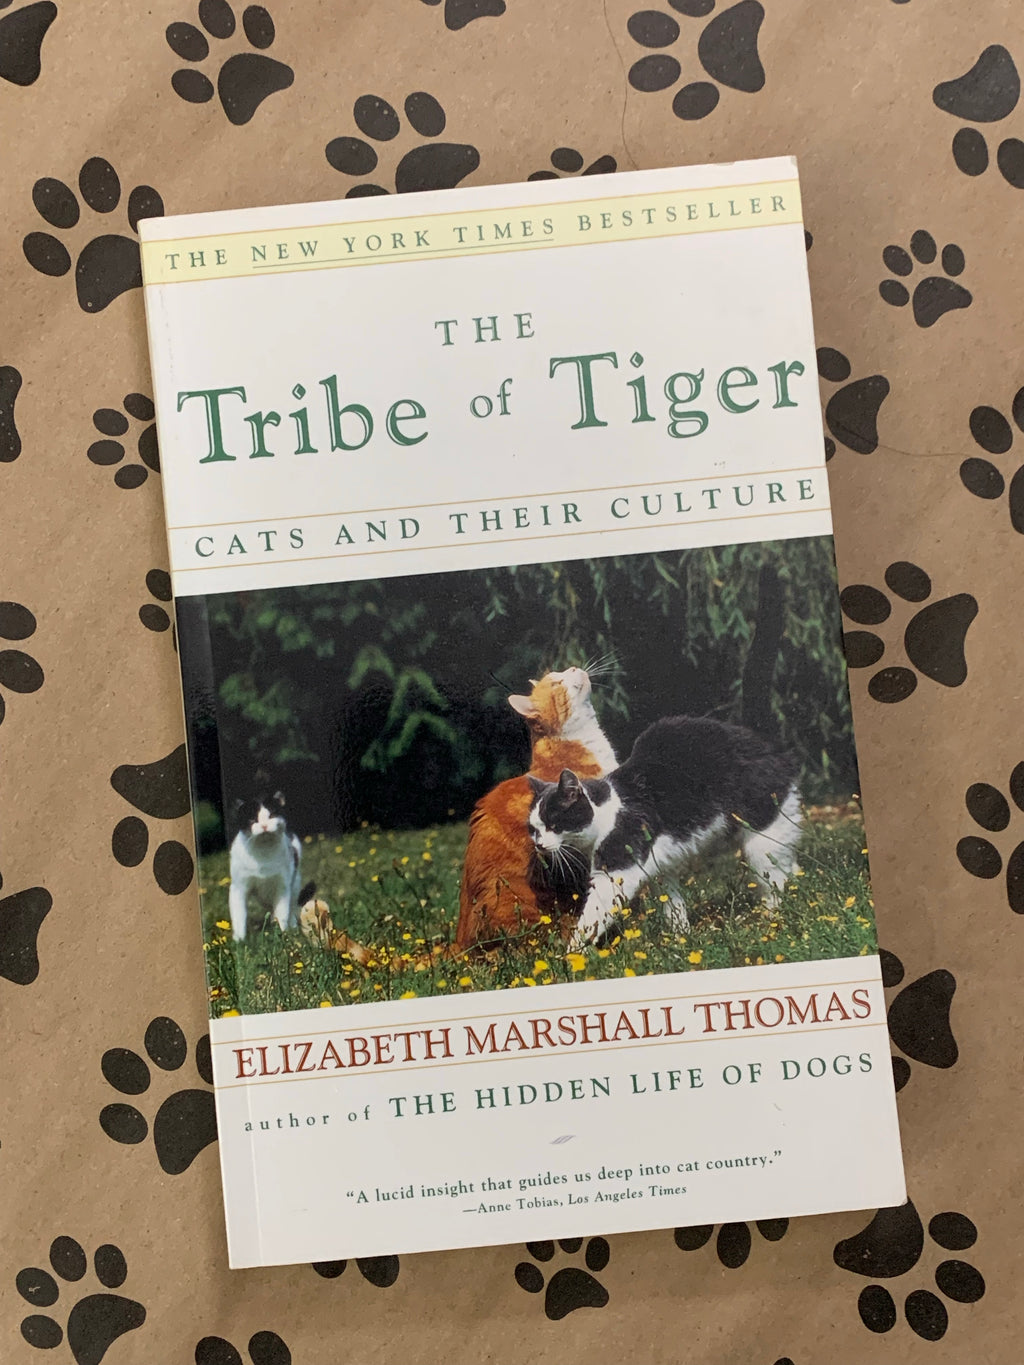 The Tribe of Tiger: Cats and Their Culture- By Elizabeth Marshall Thomas